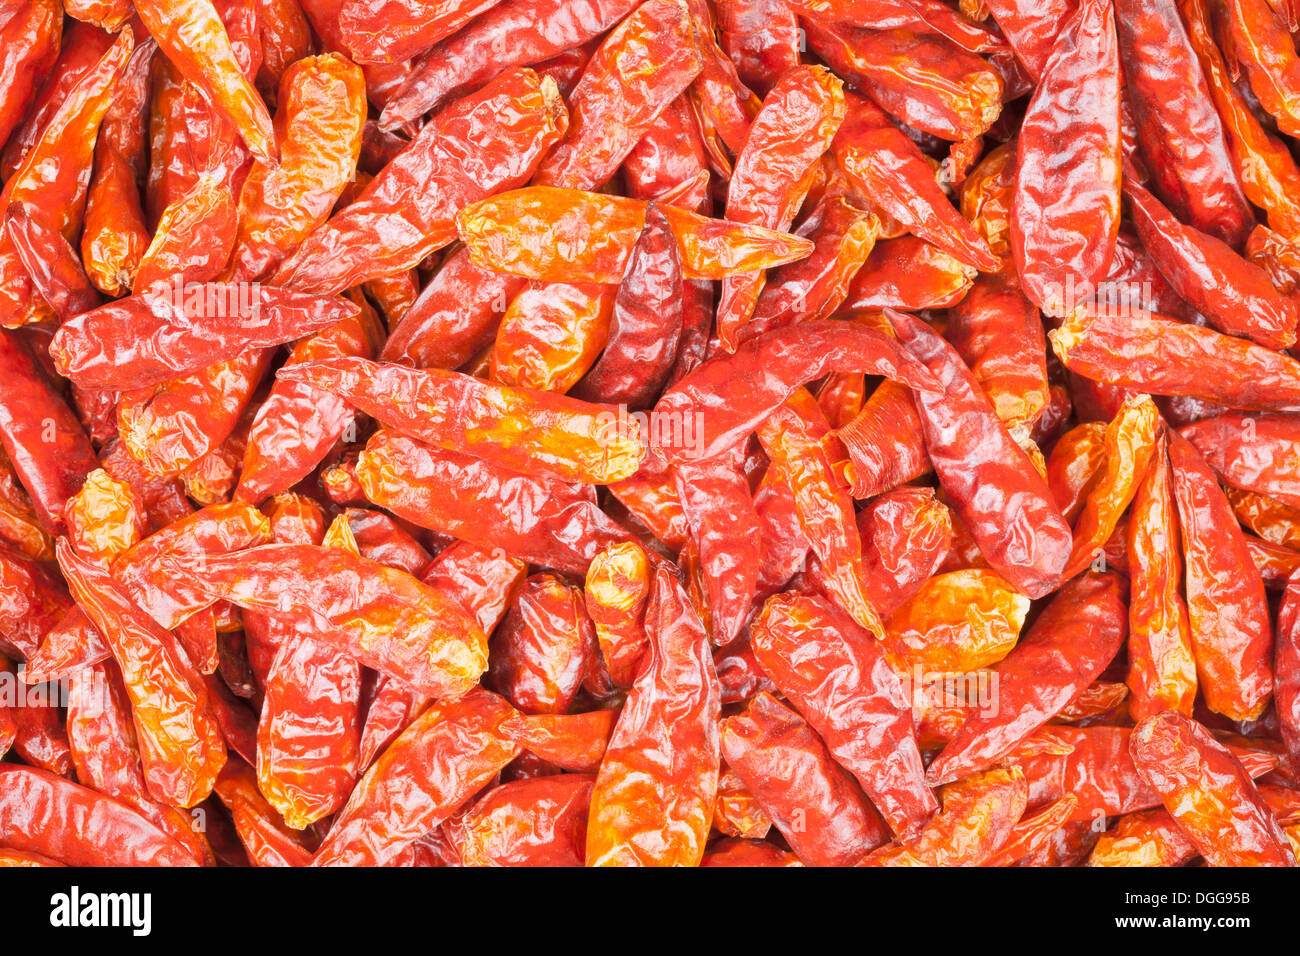 Dried red chili peppers Stock Photo